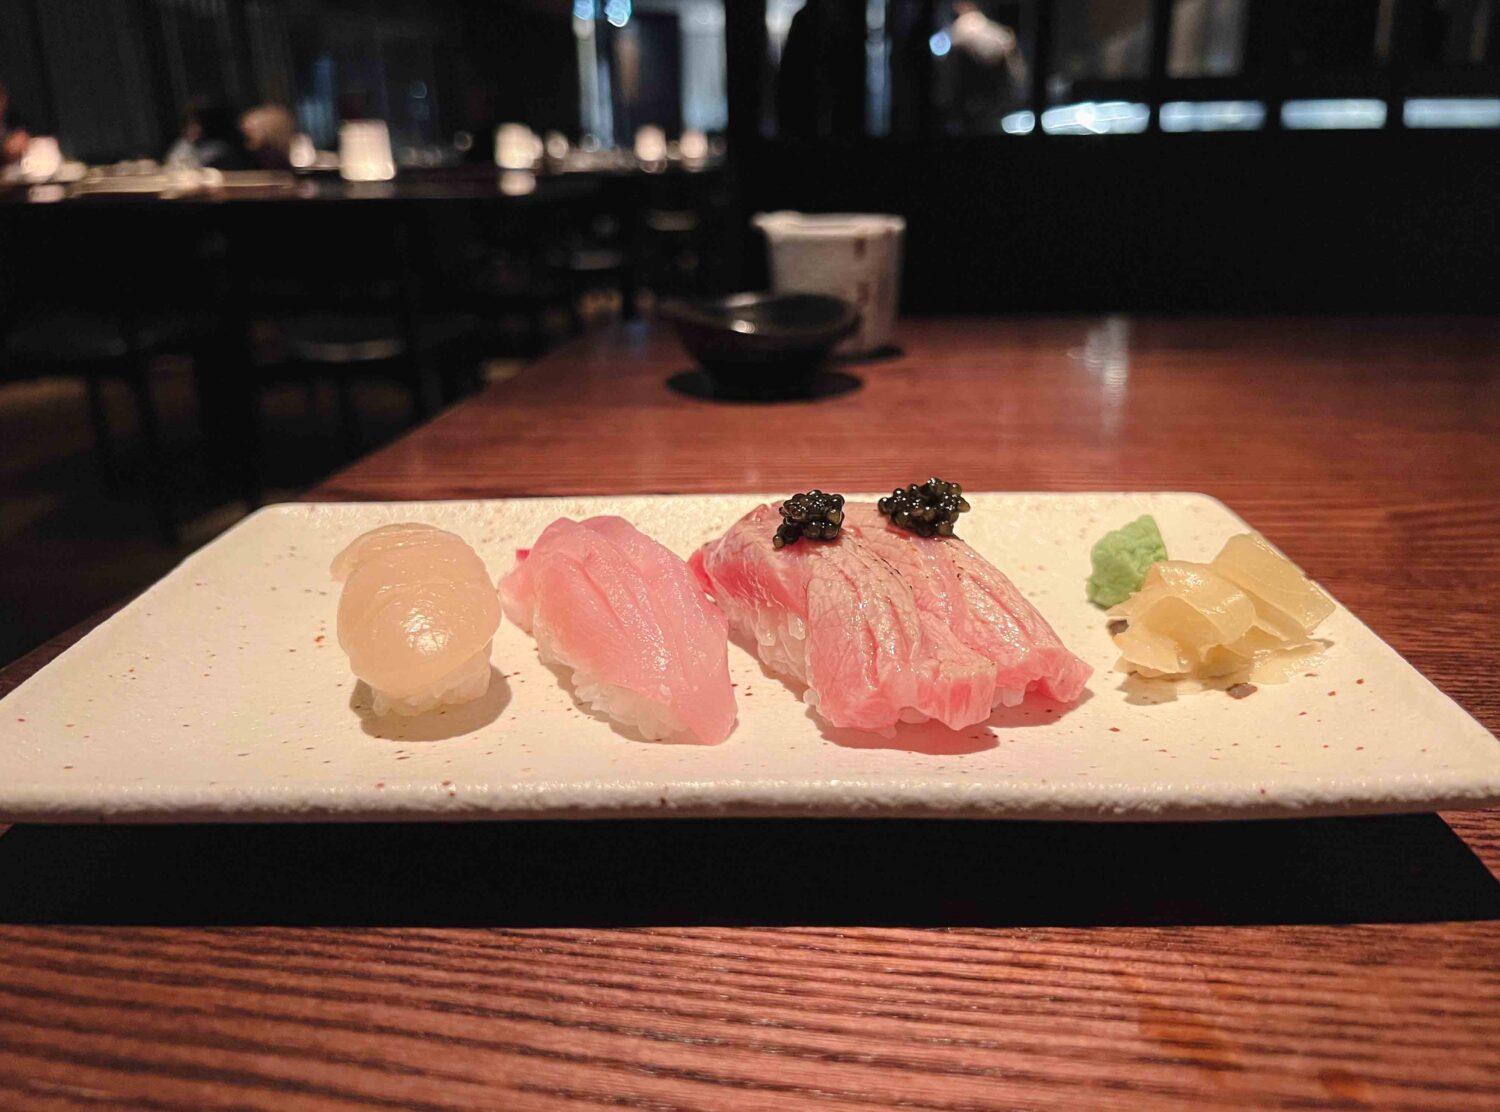 The Prince Akatoki As a self-proclaimed sushi snob, the sushi and sashimi at TOKII were divine. I didn't even look at the menu and let the experts wow me — they did not disappoint. I would definitely come back here just for the sushi